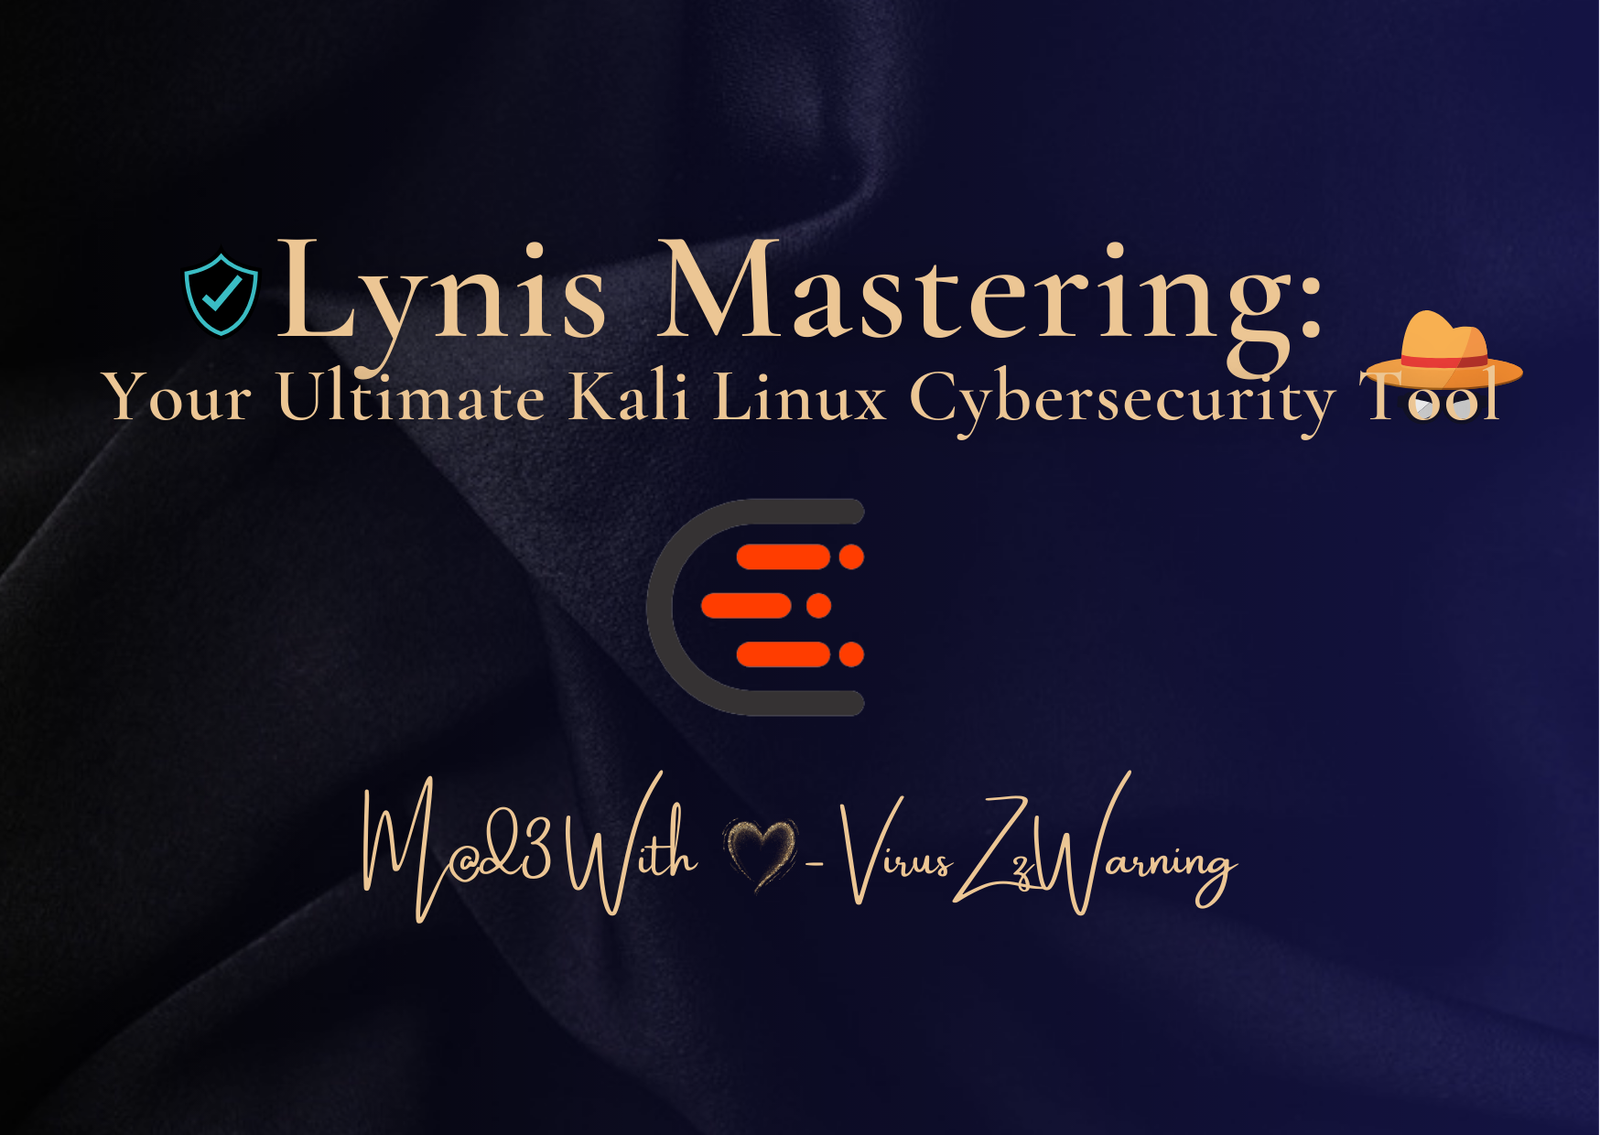 Lynis Mastering Your Ultimate Kali Linux Cybersecurity Tool